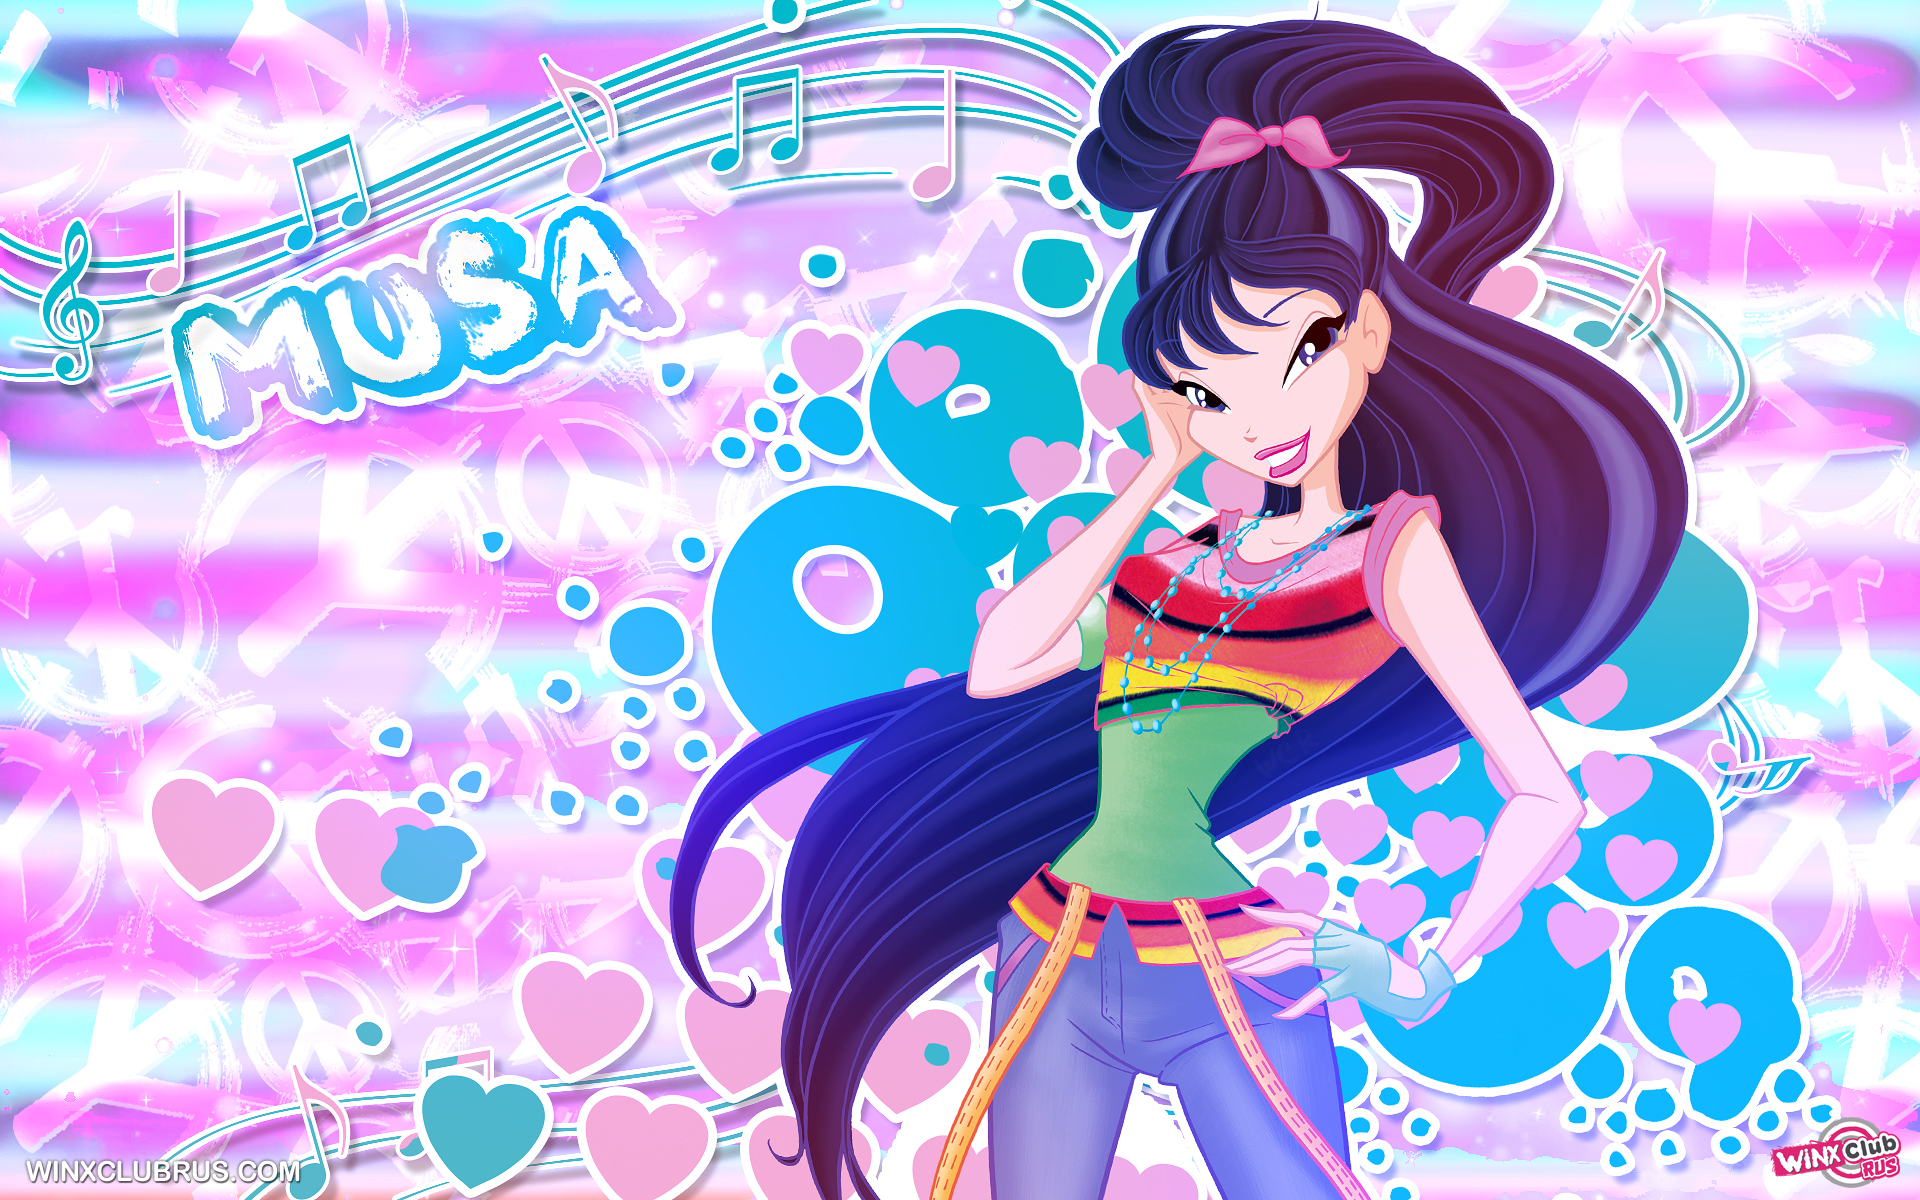 Winx Club new bright and colorful wallpapers with lots of transformations and styles